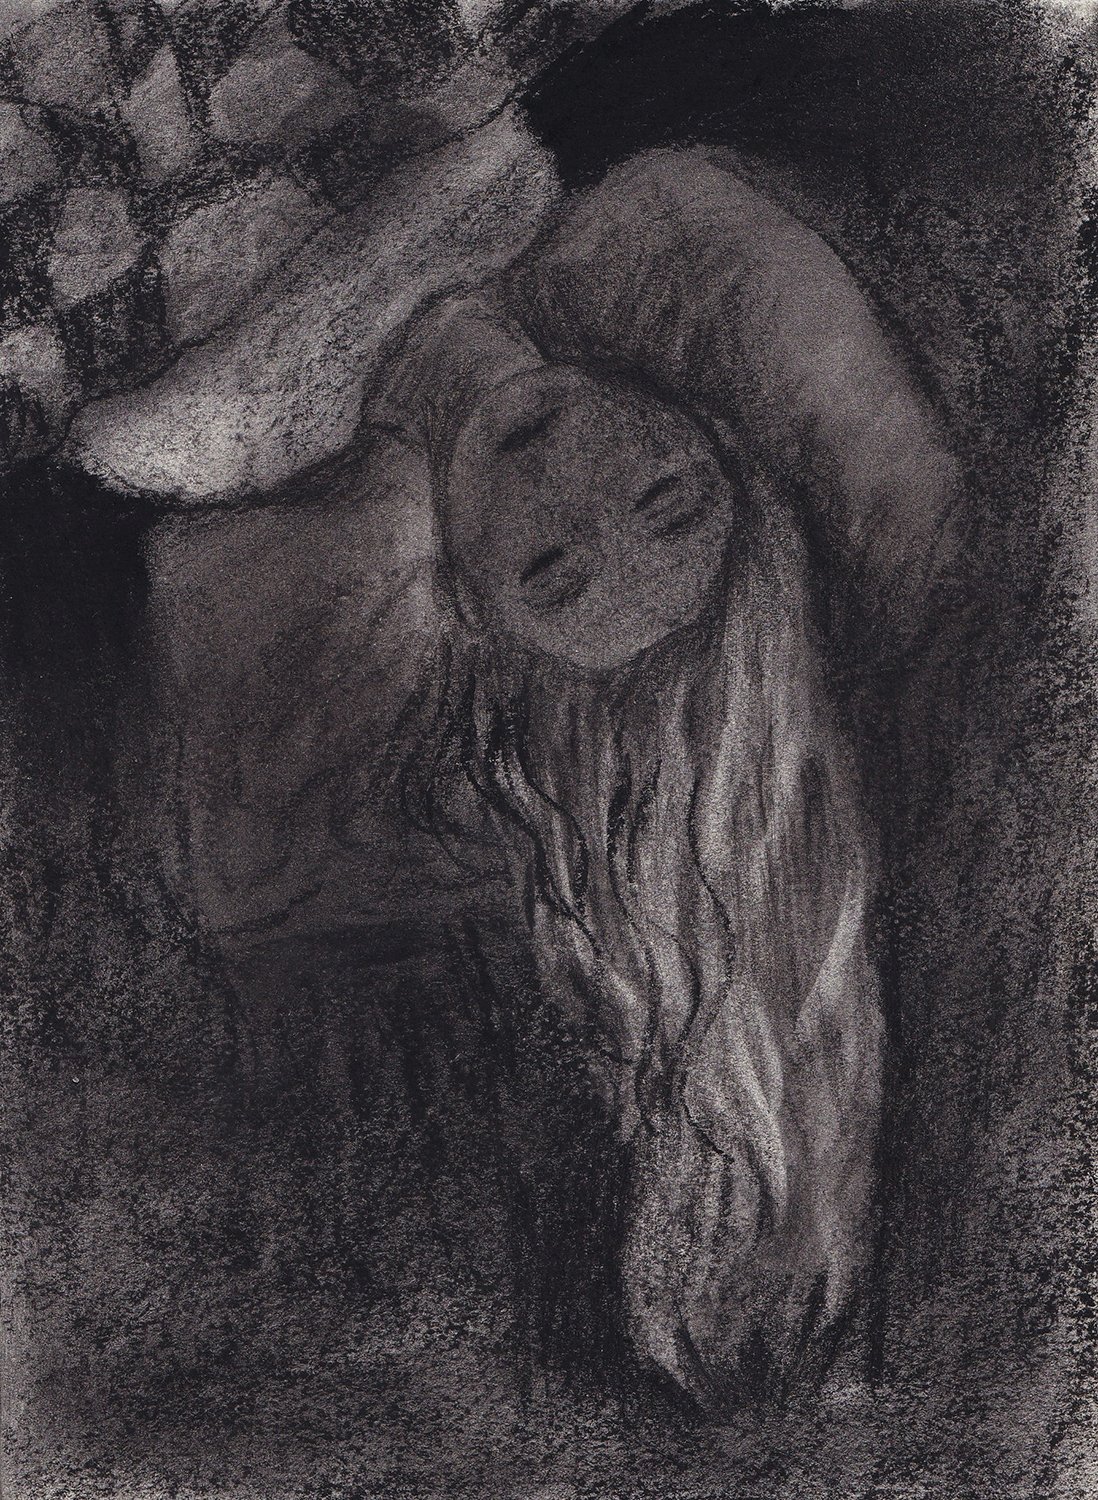 Return to Night / 2022, charcoal on paper, 15 x 20 cm